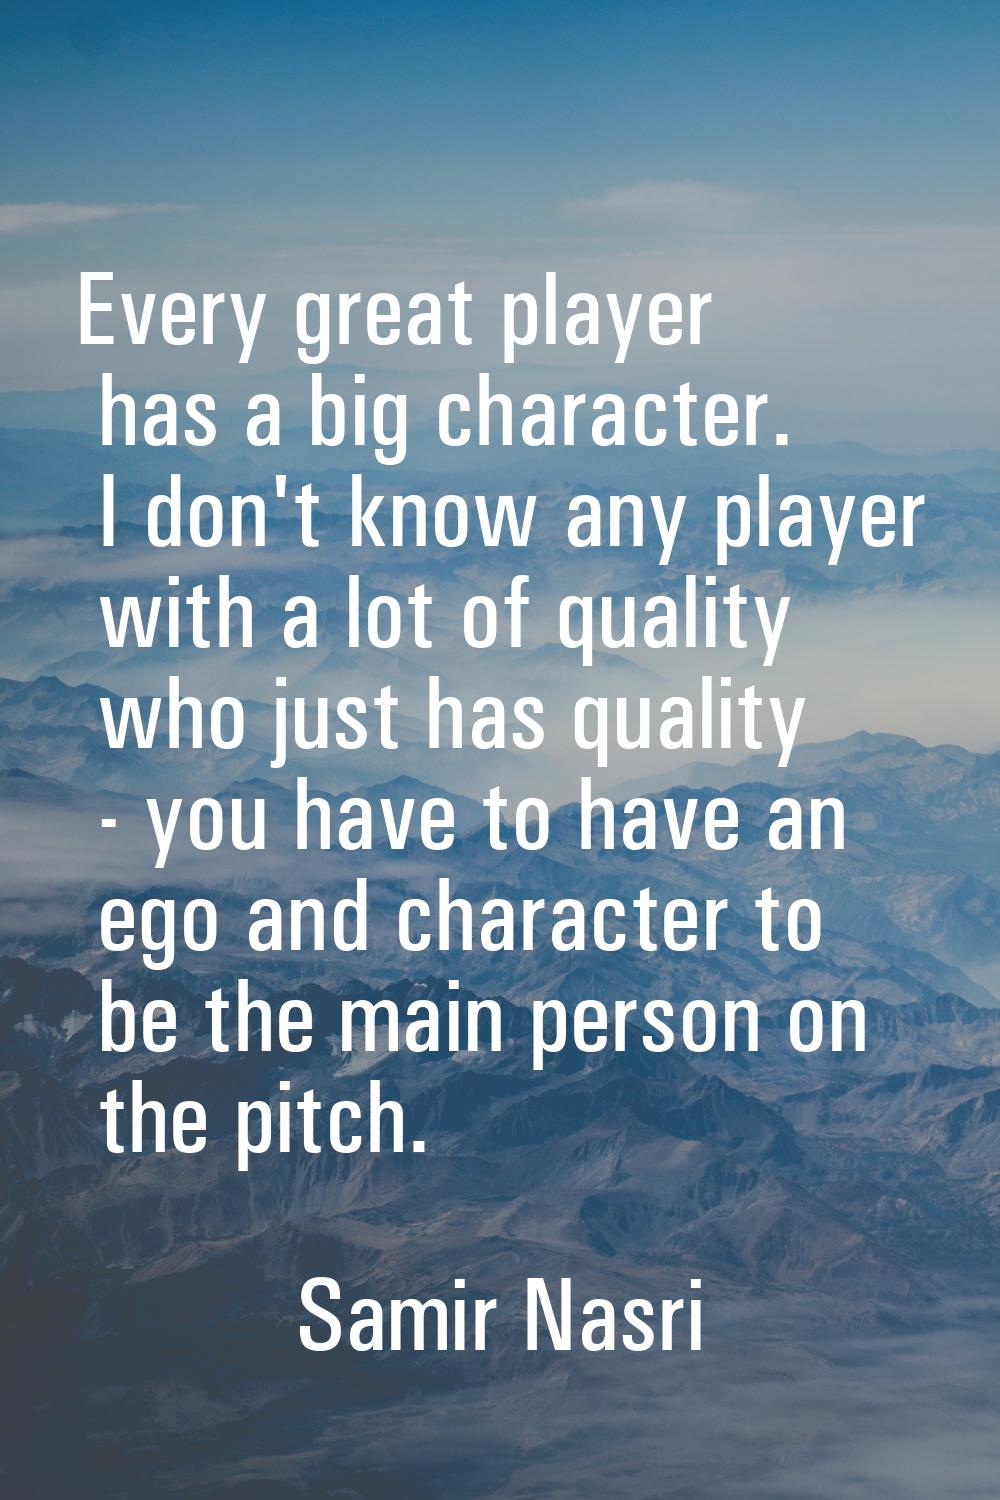 Every great player has a big character. I don't know any player with a lot of quality who just has 